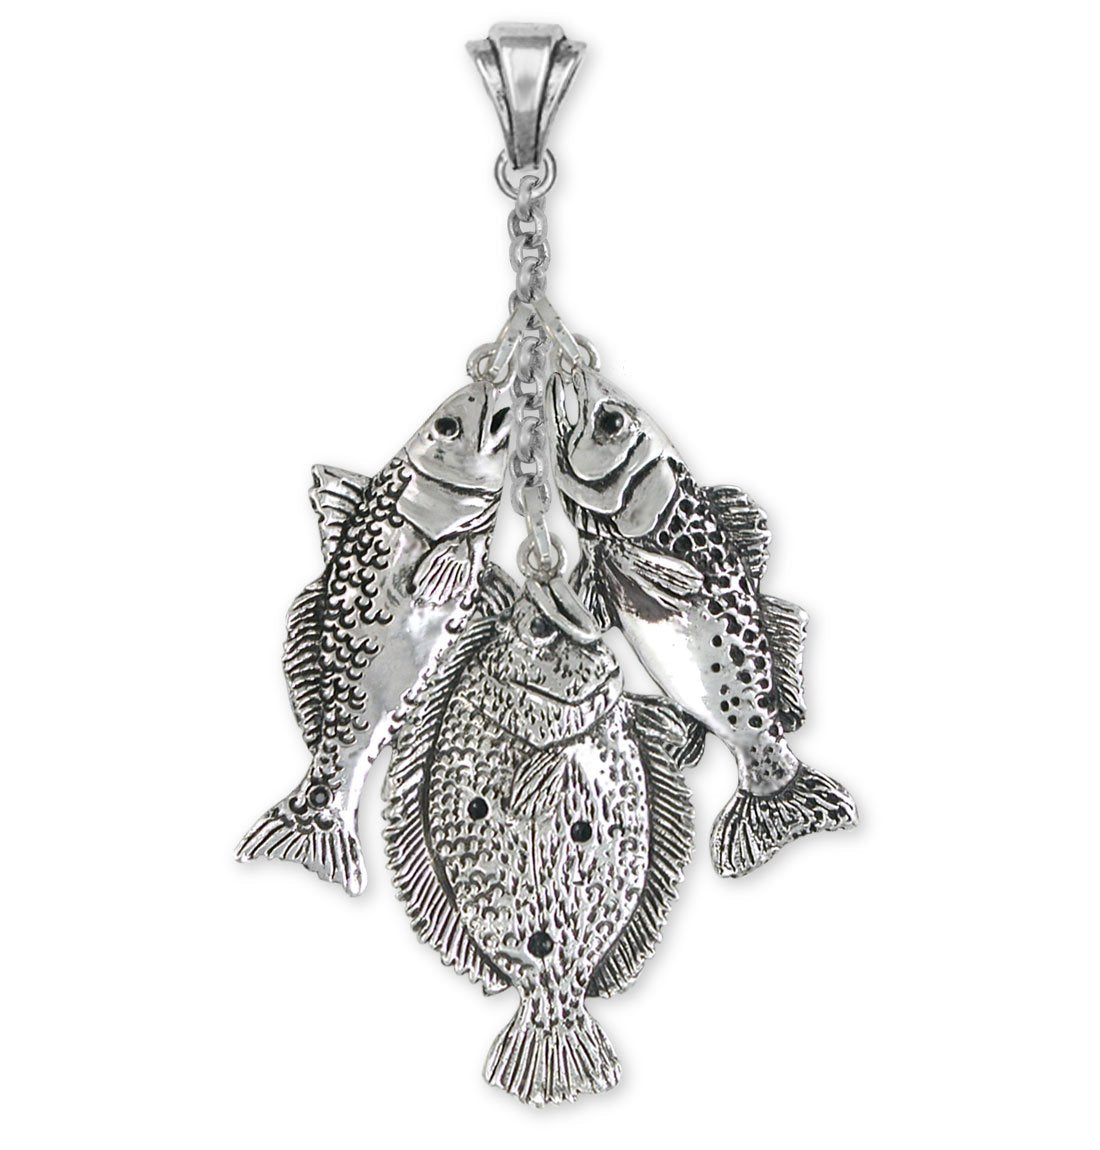 Fish Necklace SMALL Fishing Necklace Fishing Gift Two Fish Charm